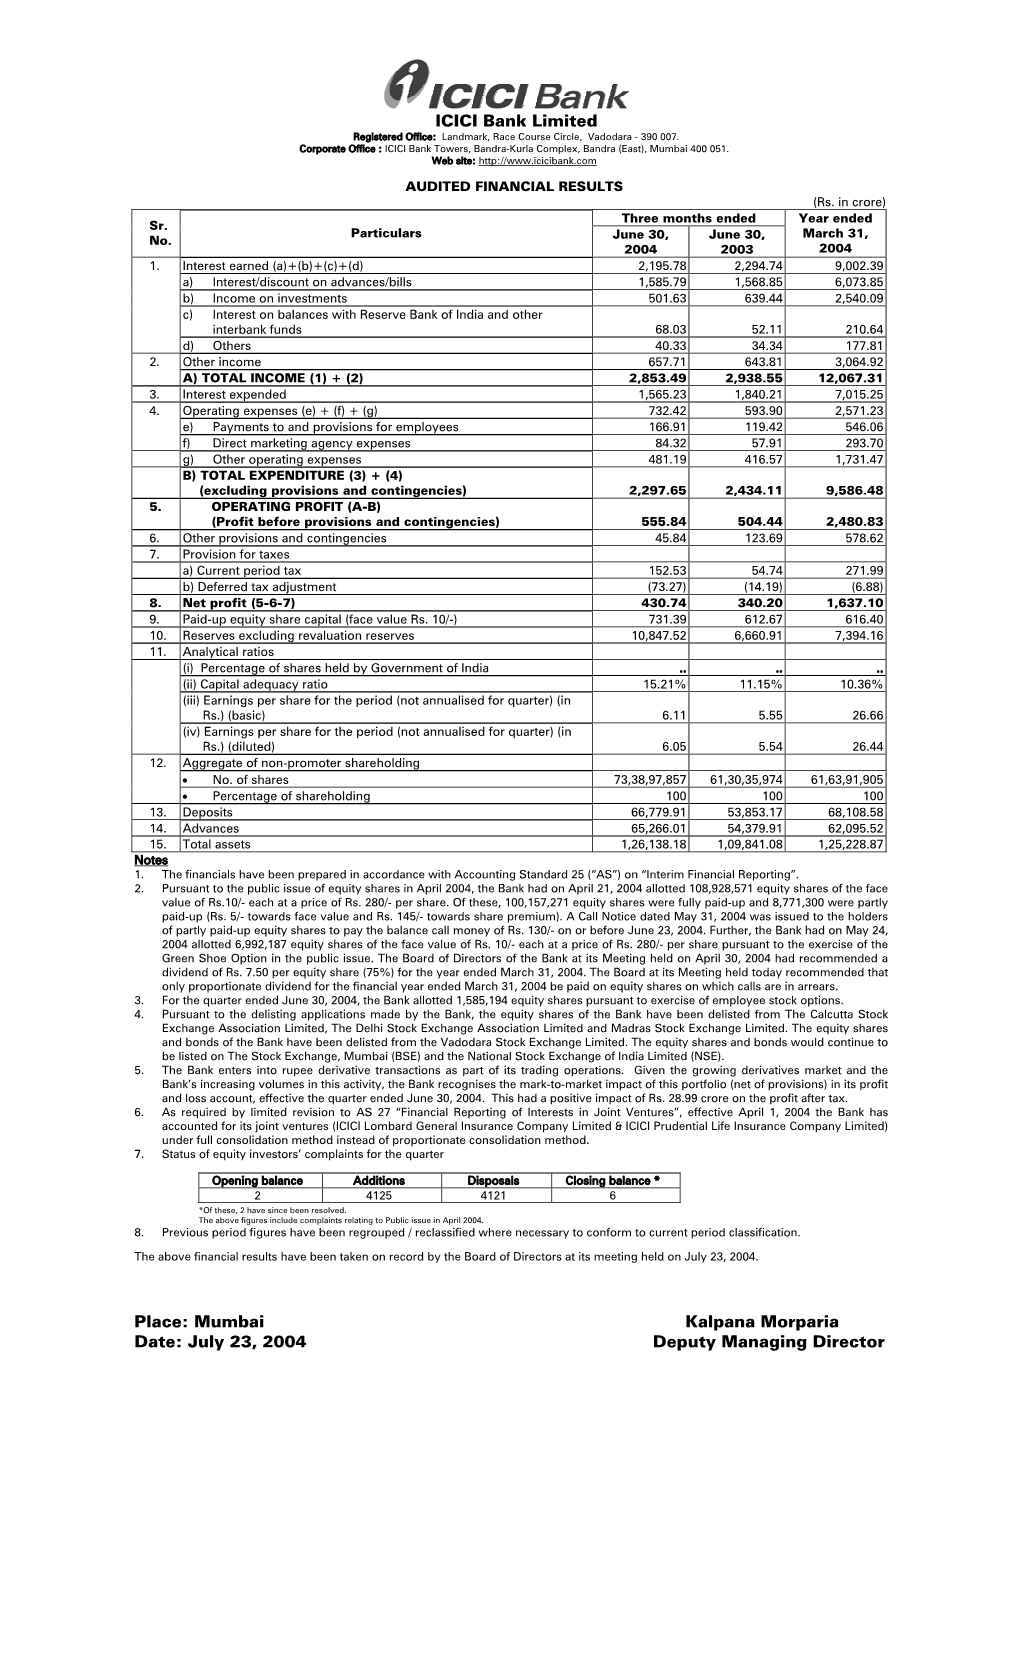 AUDITED FINANCIAL RESULTS (Rs